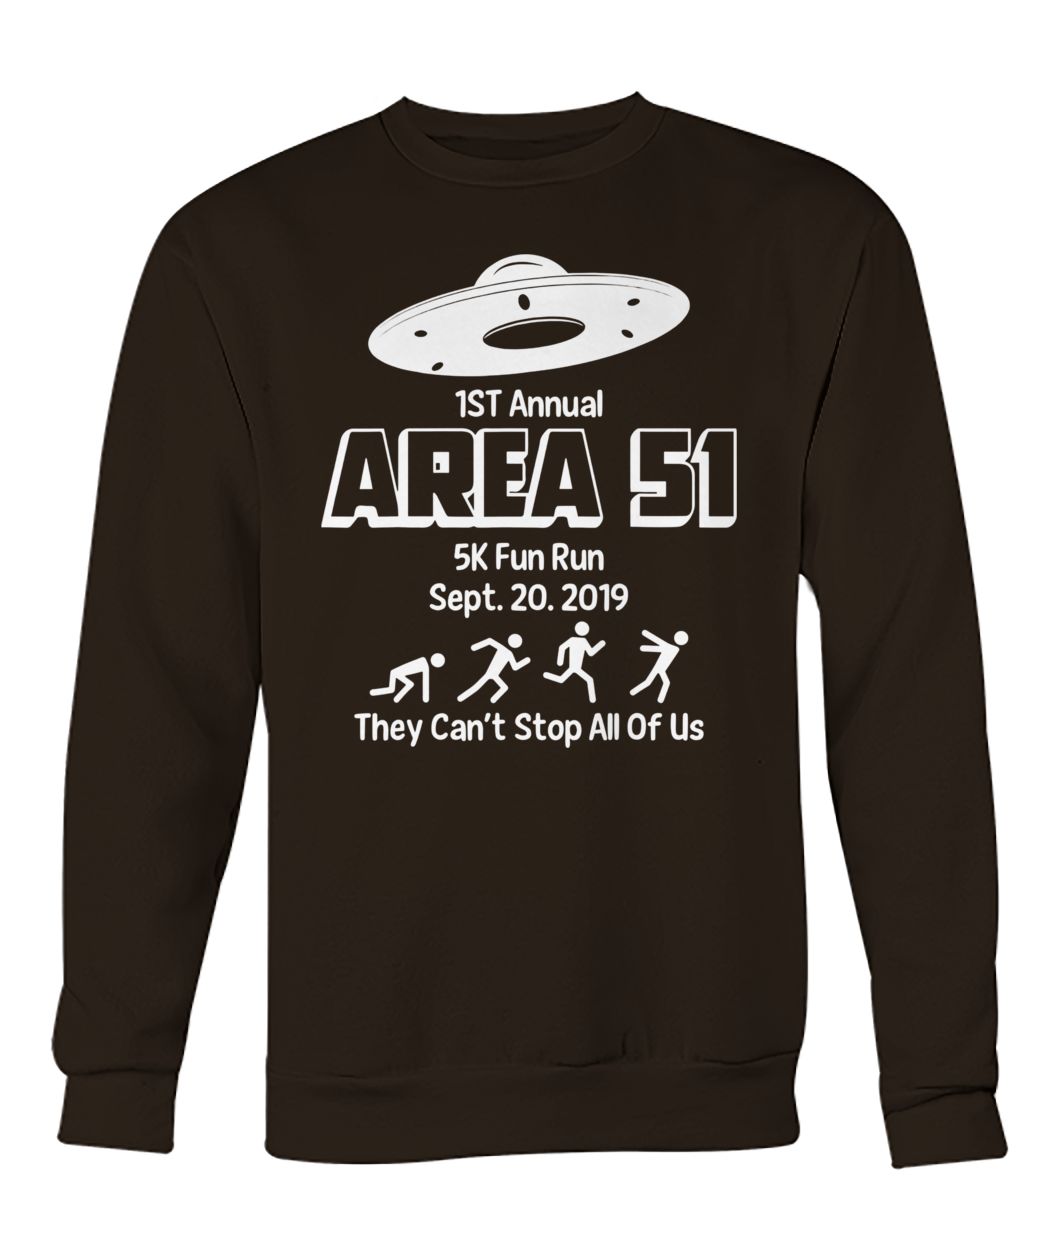 1st annual area 51 5k fun run september 2019 they can't stop all of us crew neck sweatshirt